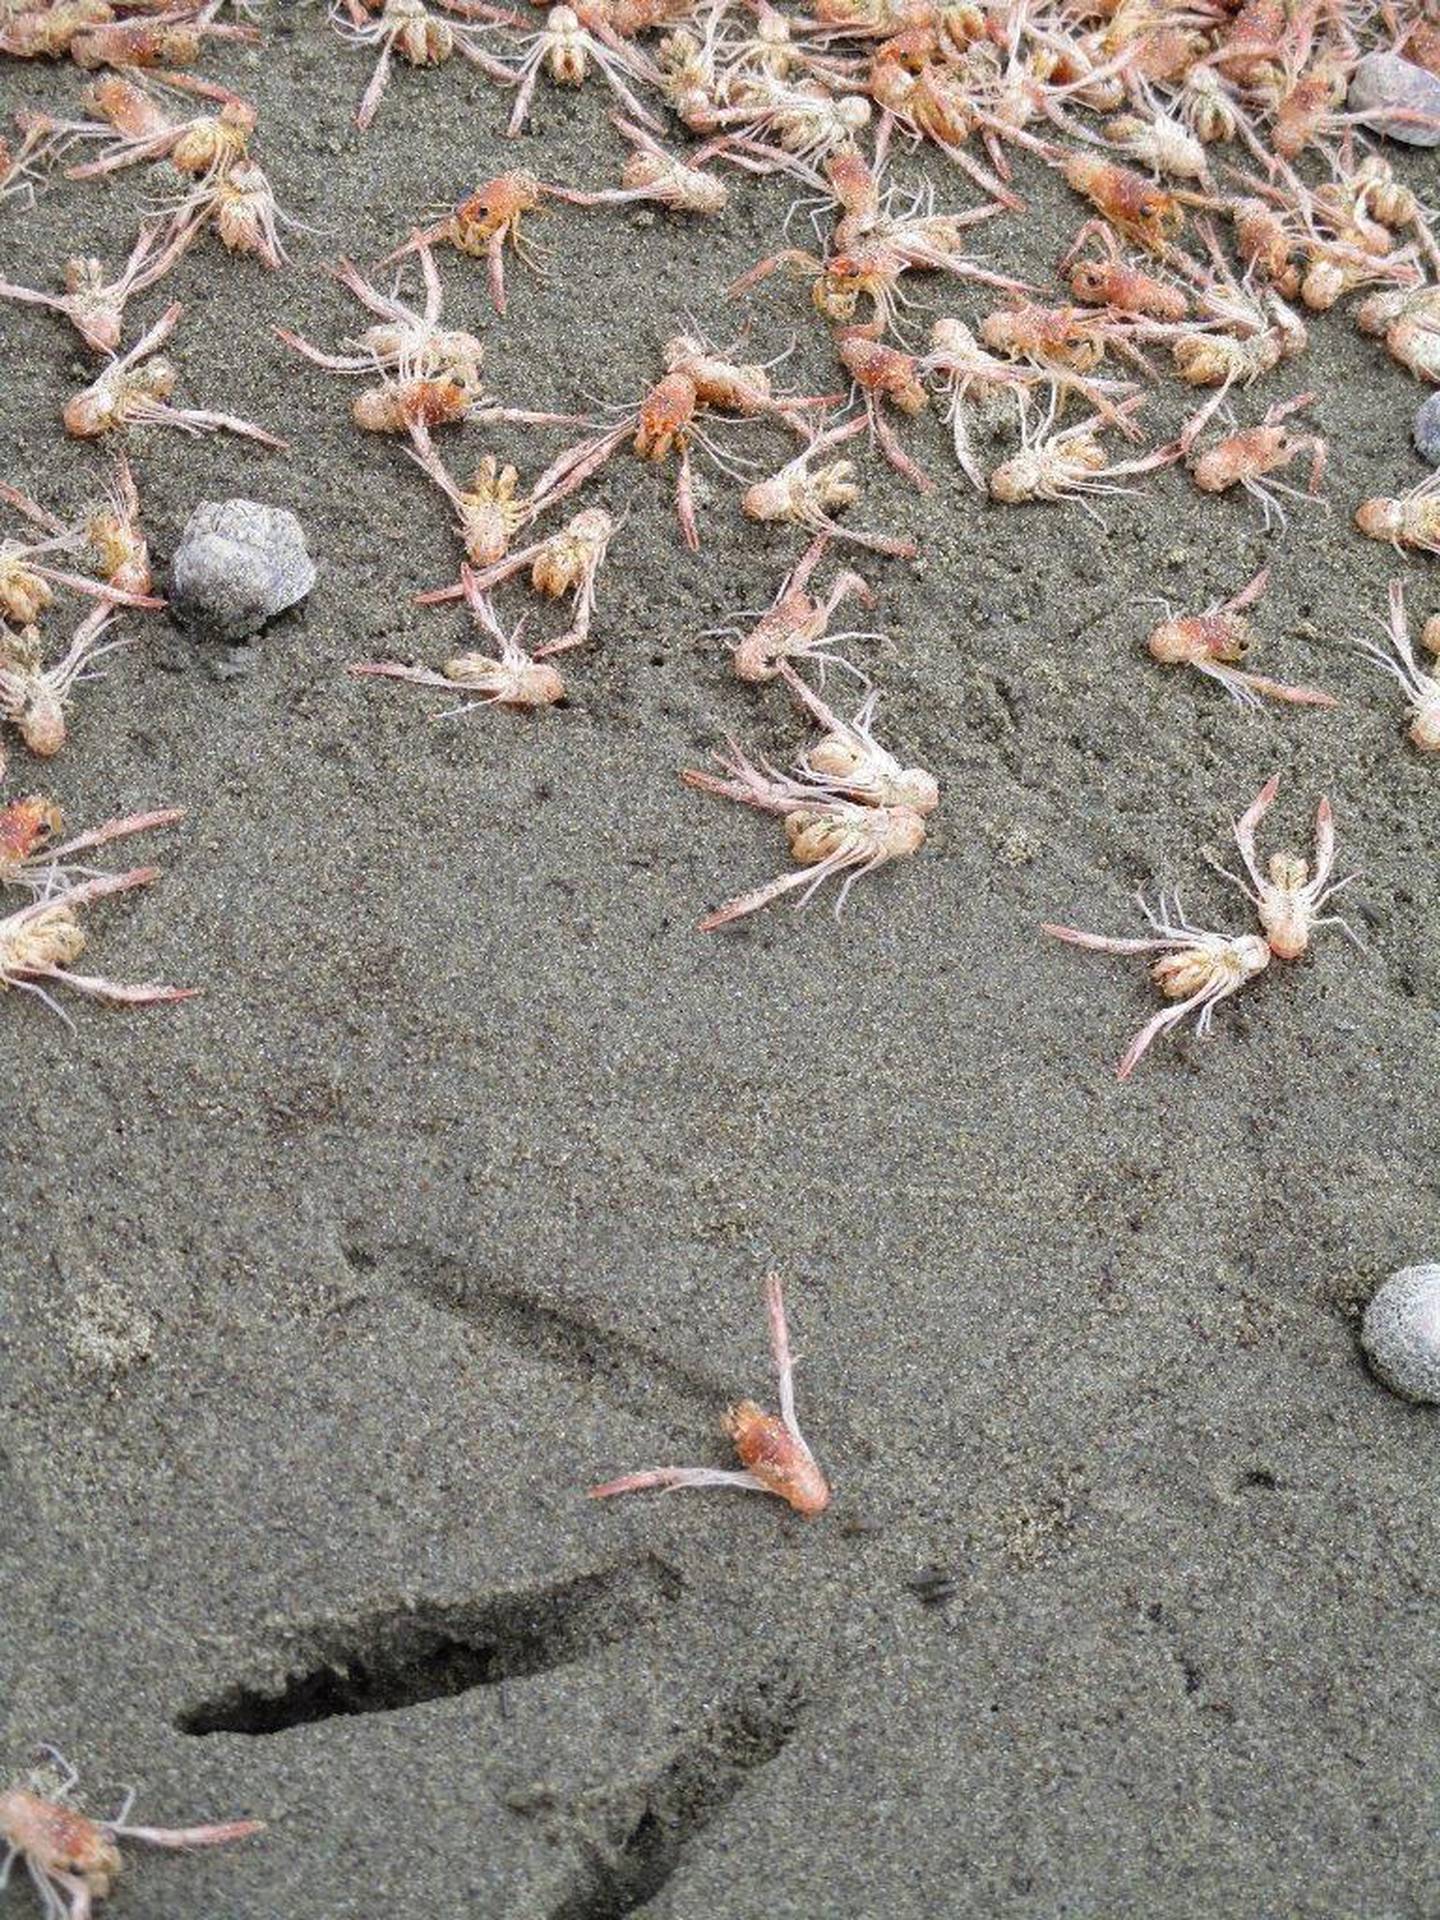 Millions of tiny crabs have washed up on the beach. Photo: Supplied via NZH